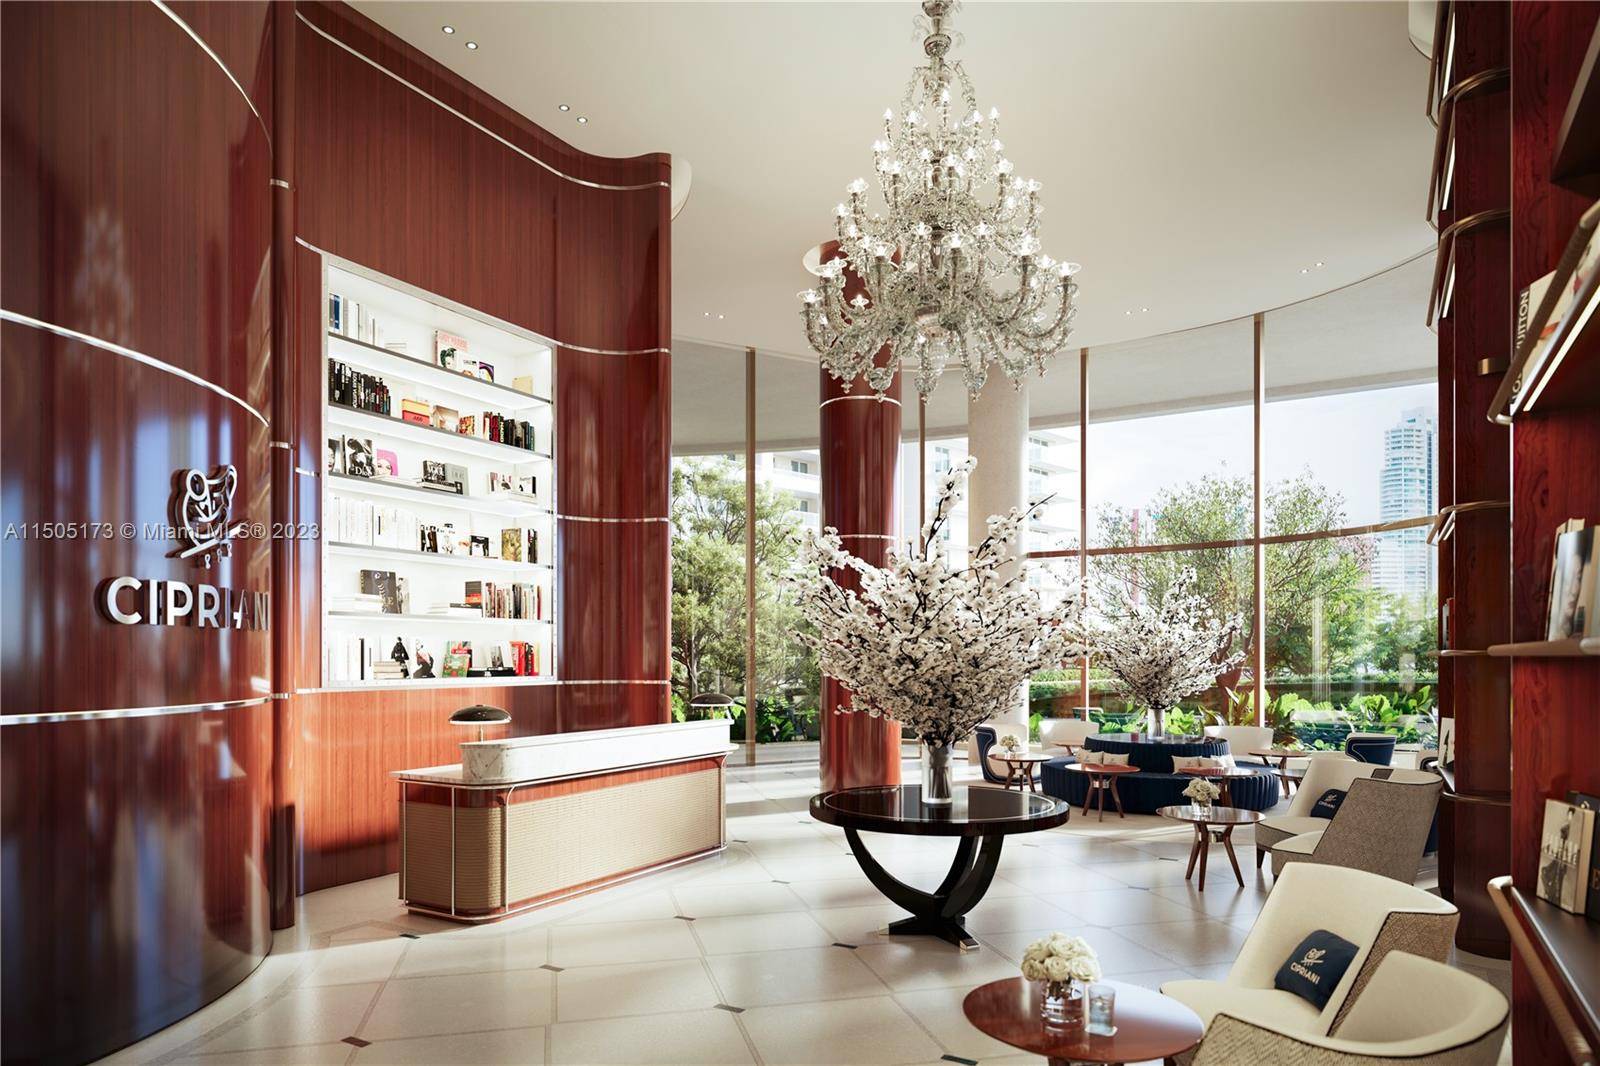 Positioned on a privileged location, at the gateway to the vibrant Miami neighborhood of Brickell, Cipriani Residences Miami epitomizes the timeless Italian spirit, style, and service for which the brand ...